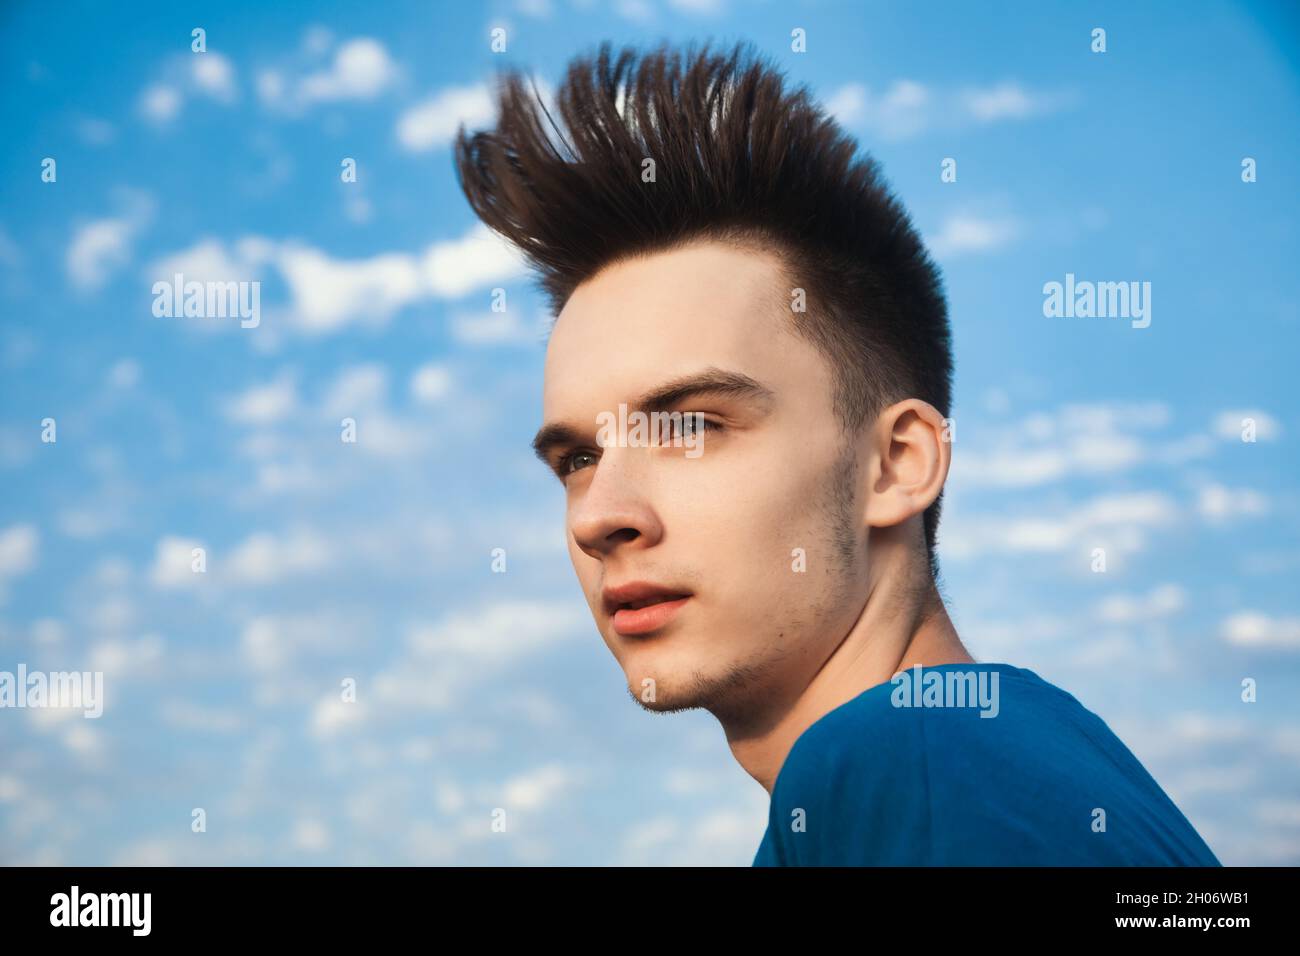 Outdoor portrait of teenager boy looking away with hair blowing in the wind against evening sky Stock Photo